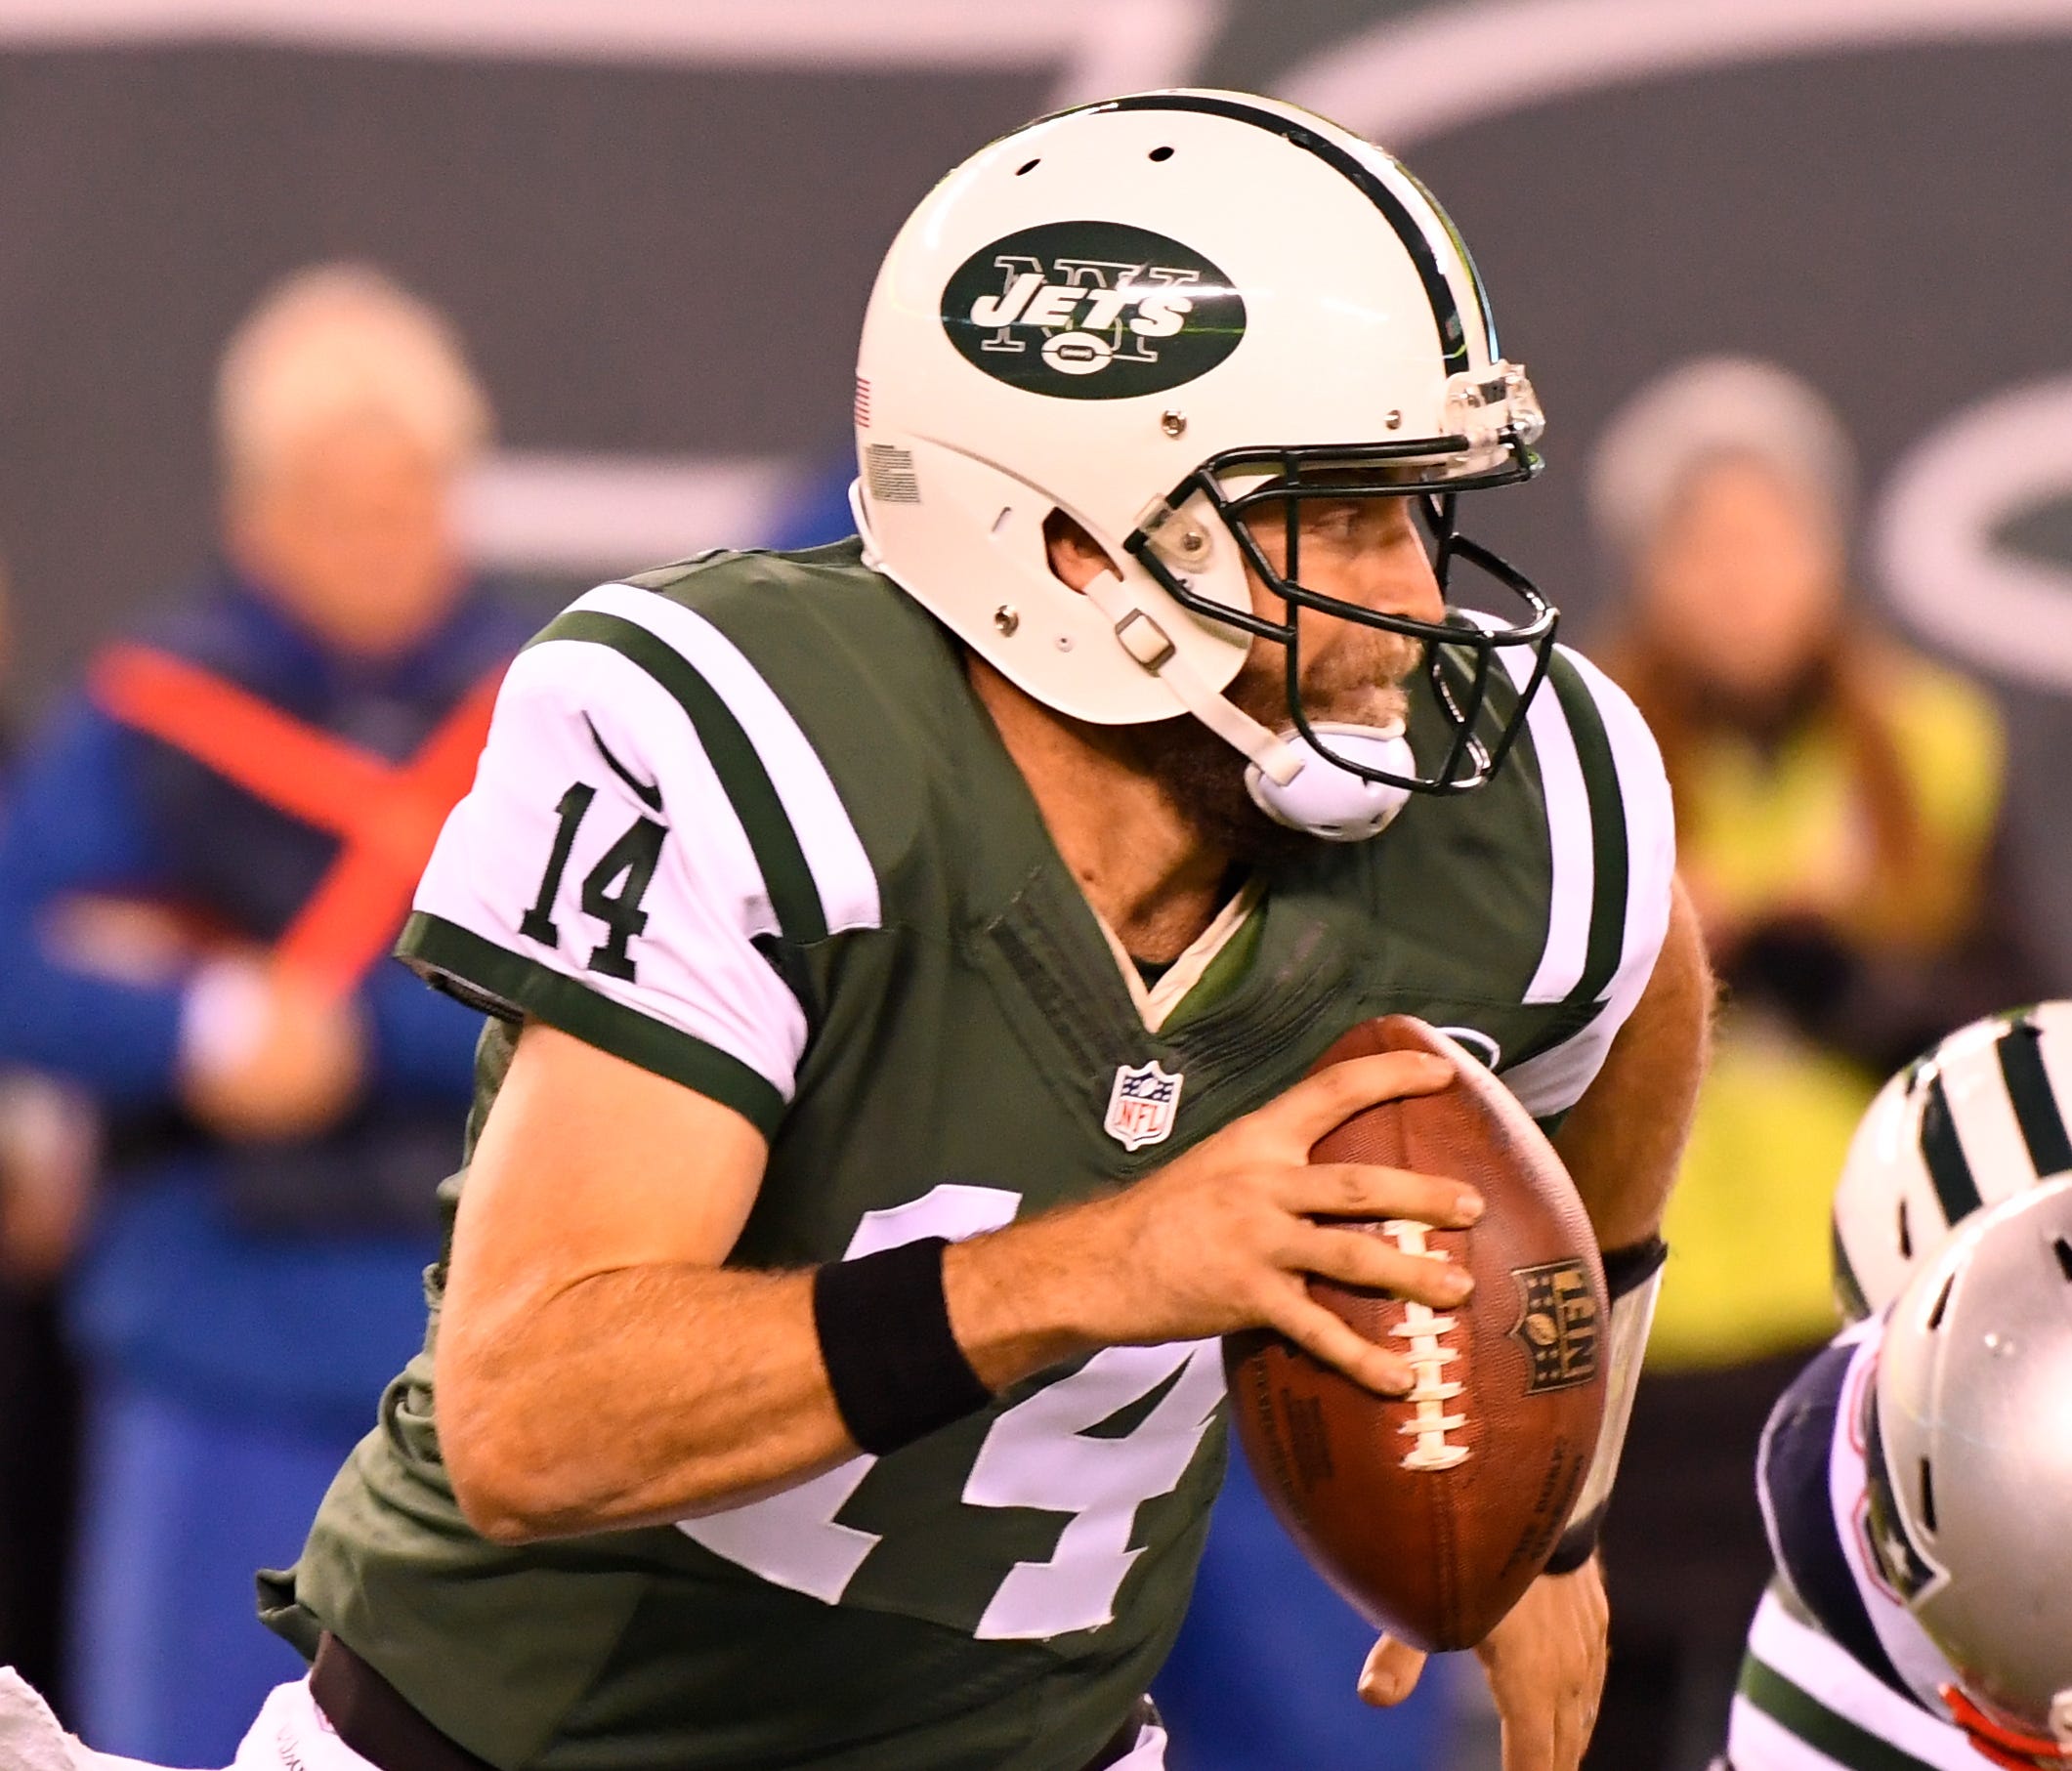 QB Ryan Fitzpatrick went 13-14 in two years with the Jets.